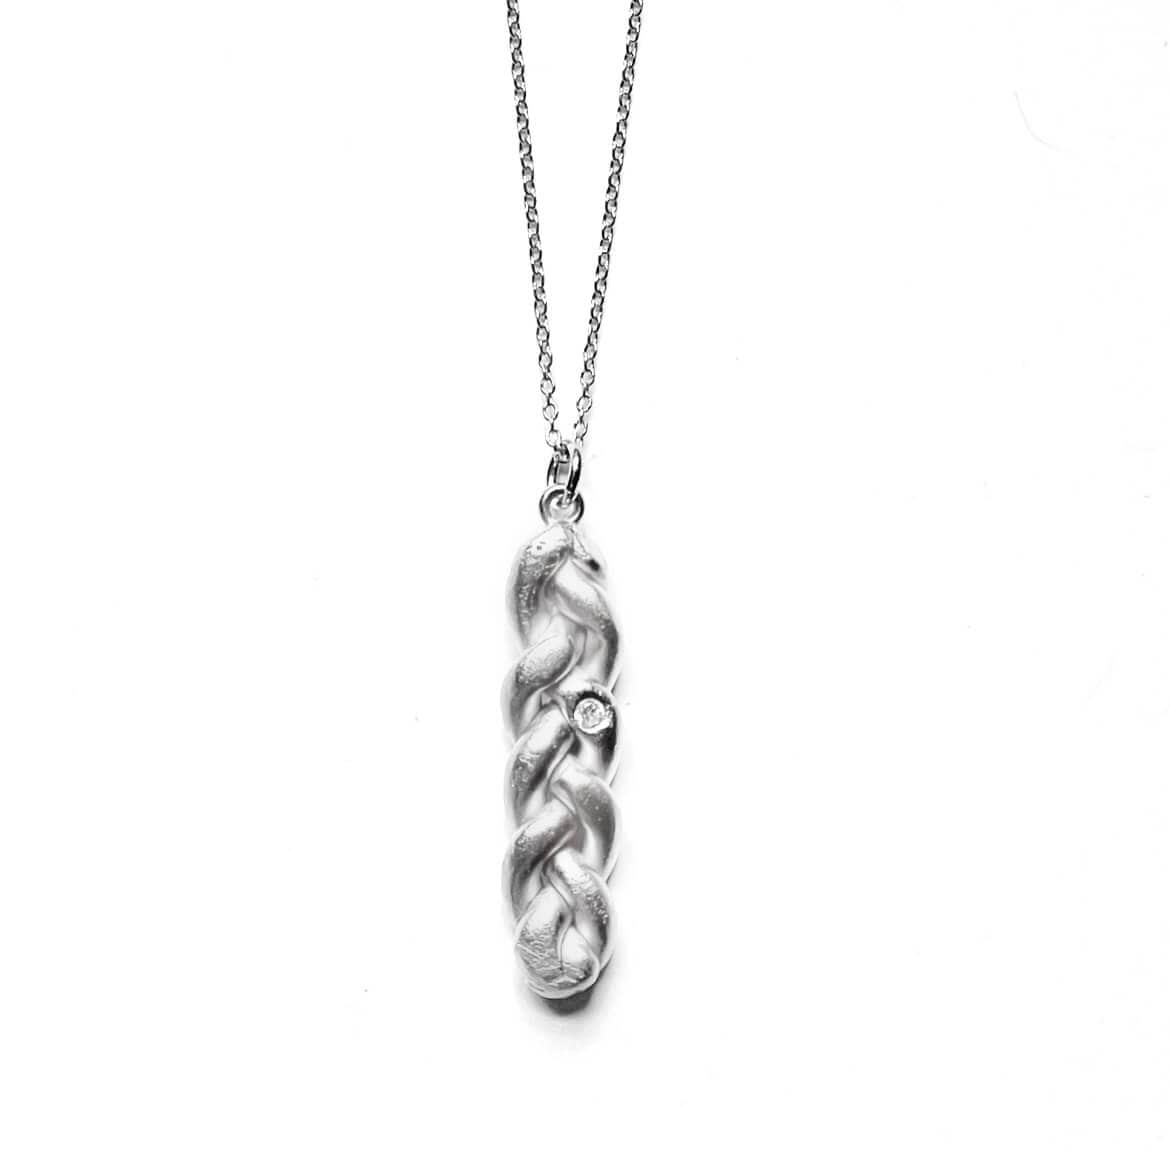 MAS Designs Jewelry Necklaces Shiny Silver Challah Pendant Necklace - Silver